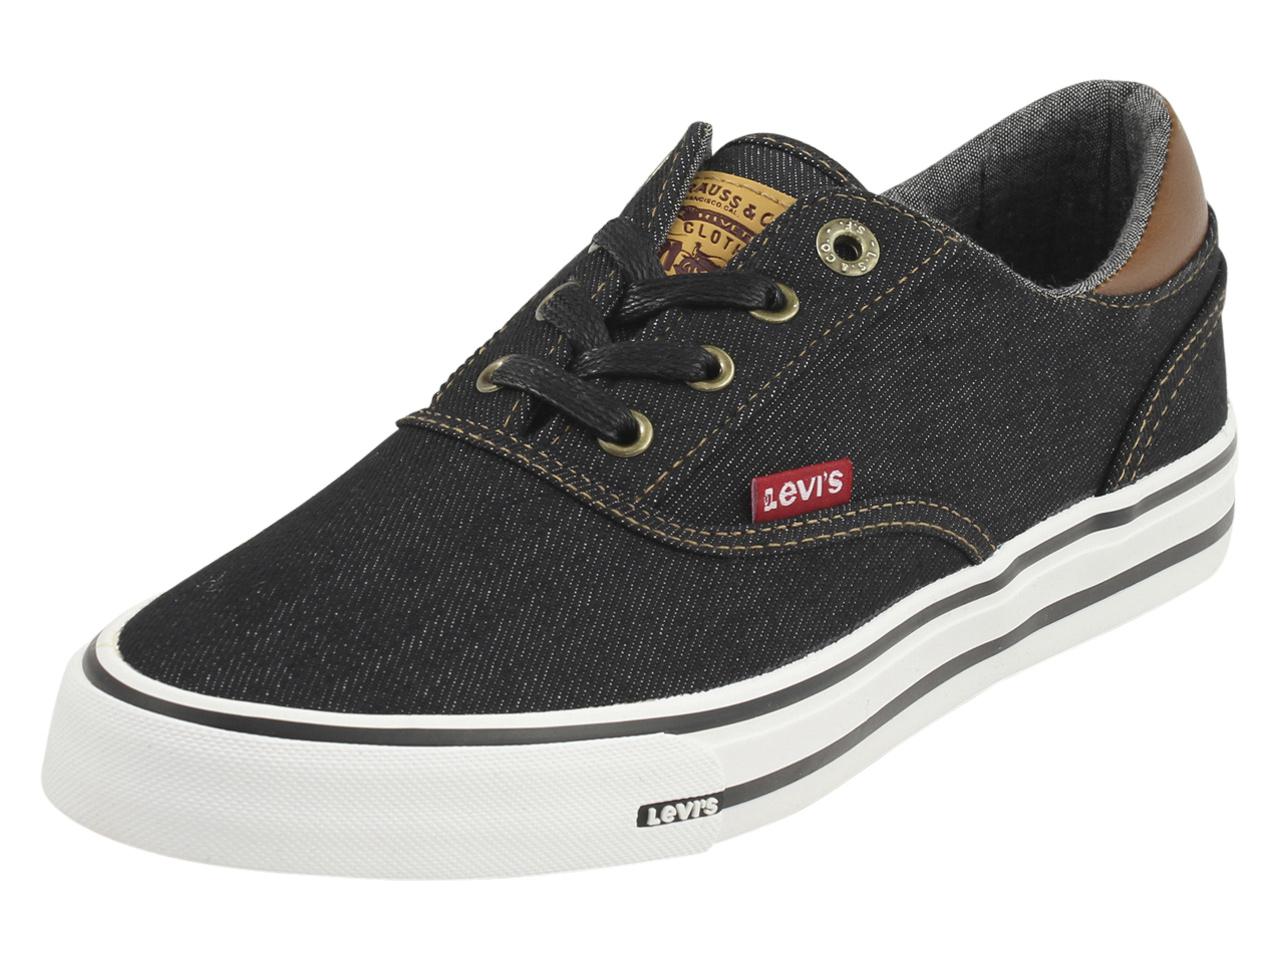 Levis Mens Sneakers Latvia, SAVE 33% 